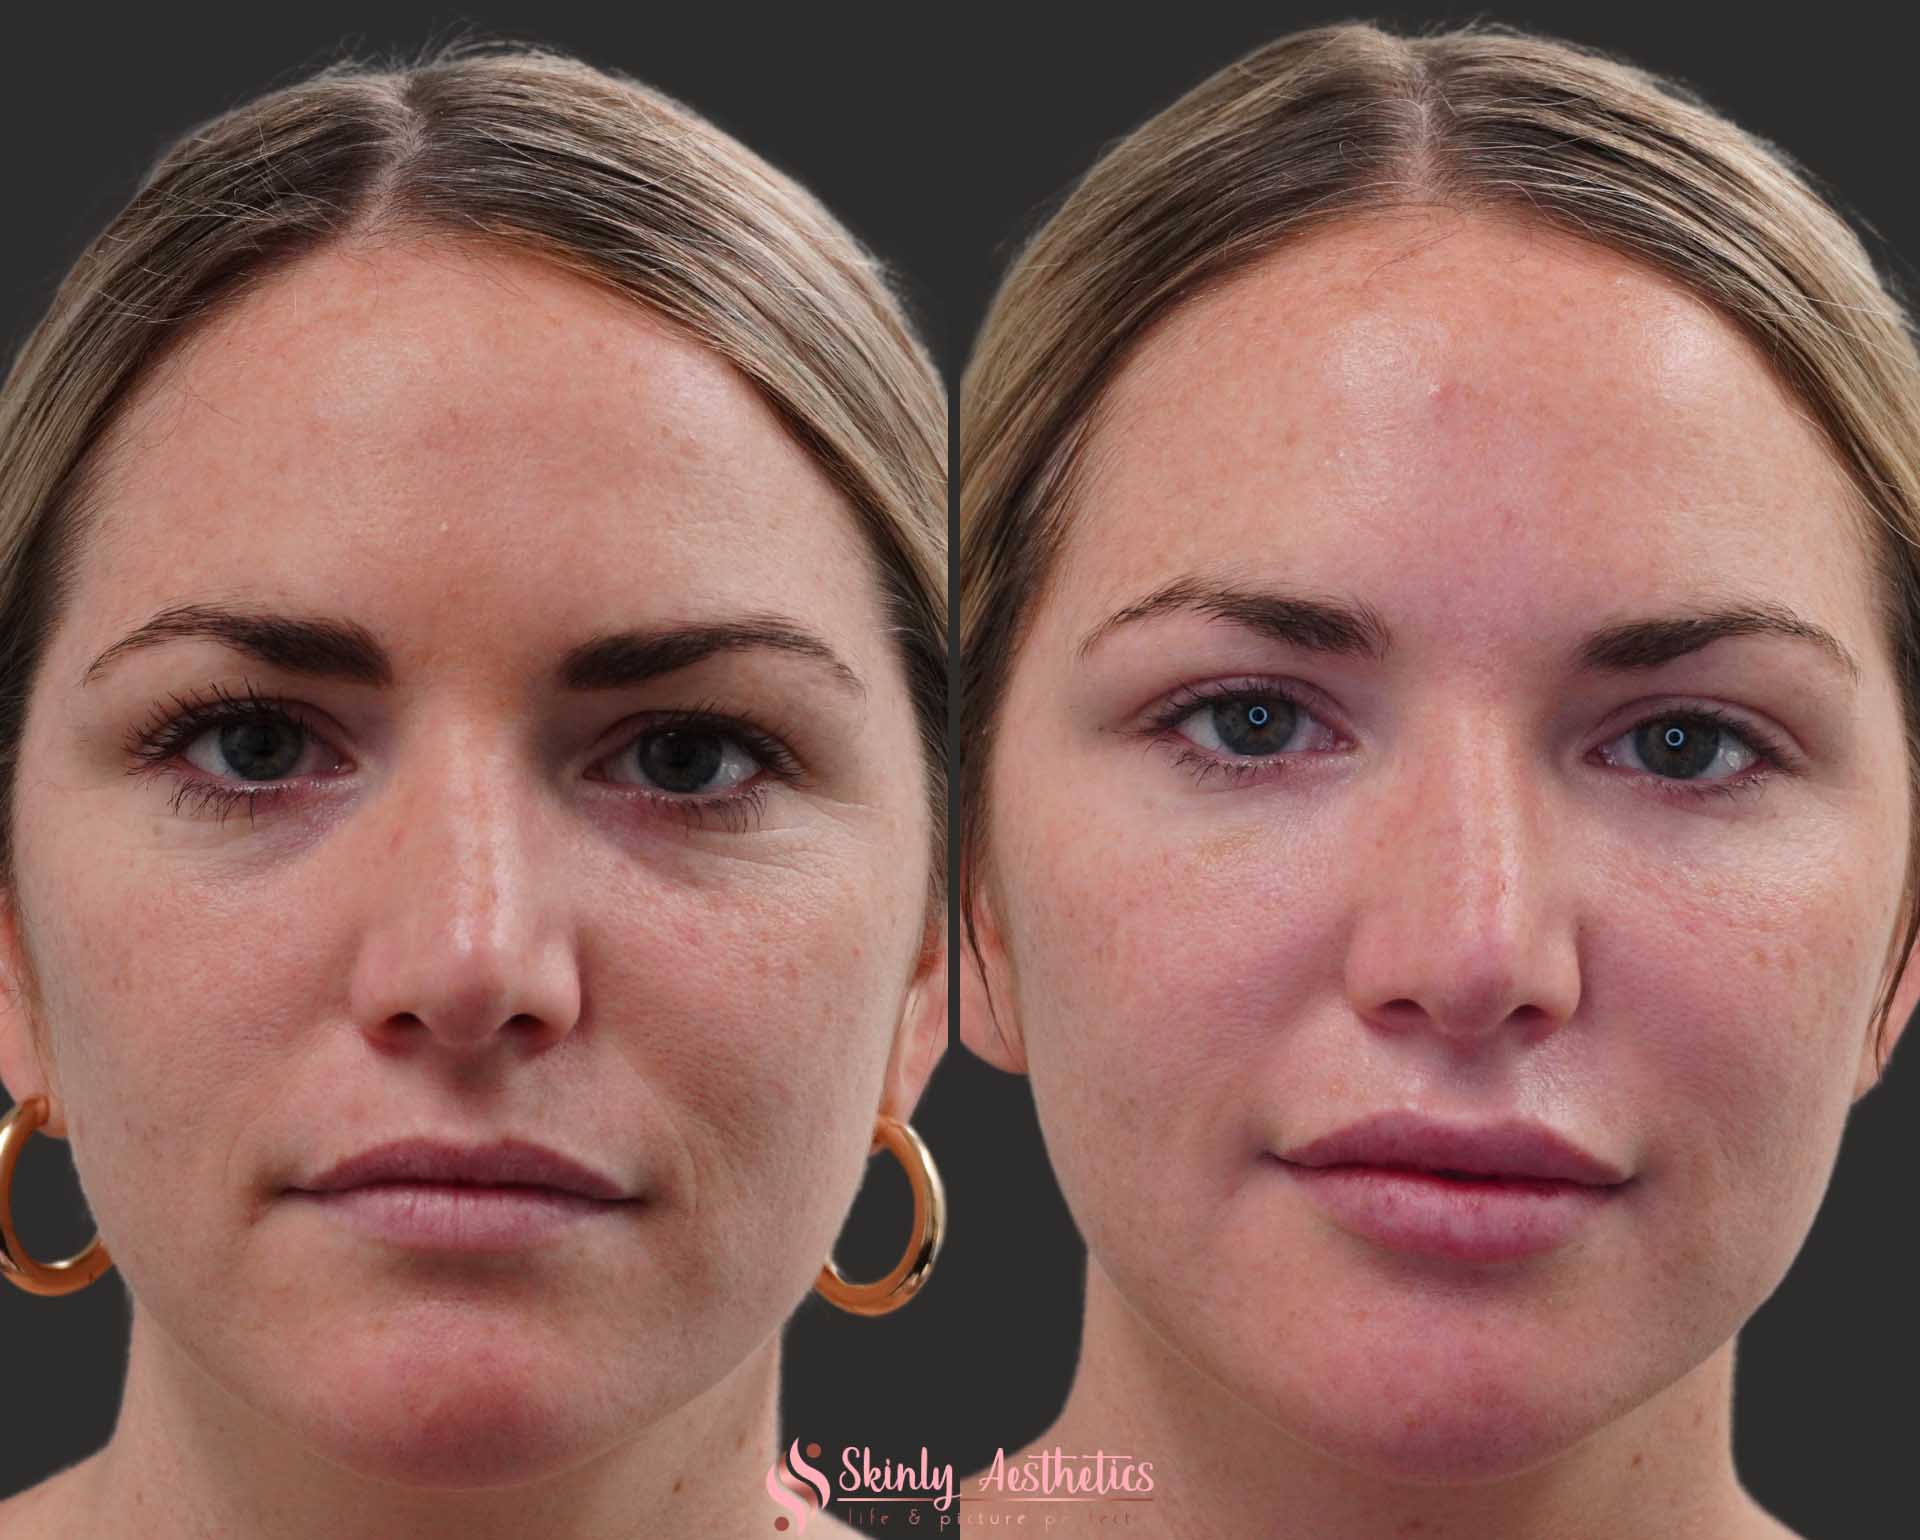 Under Eye Fillers - Before & After Results at Skinly